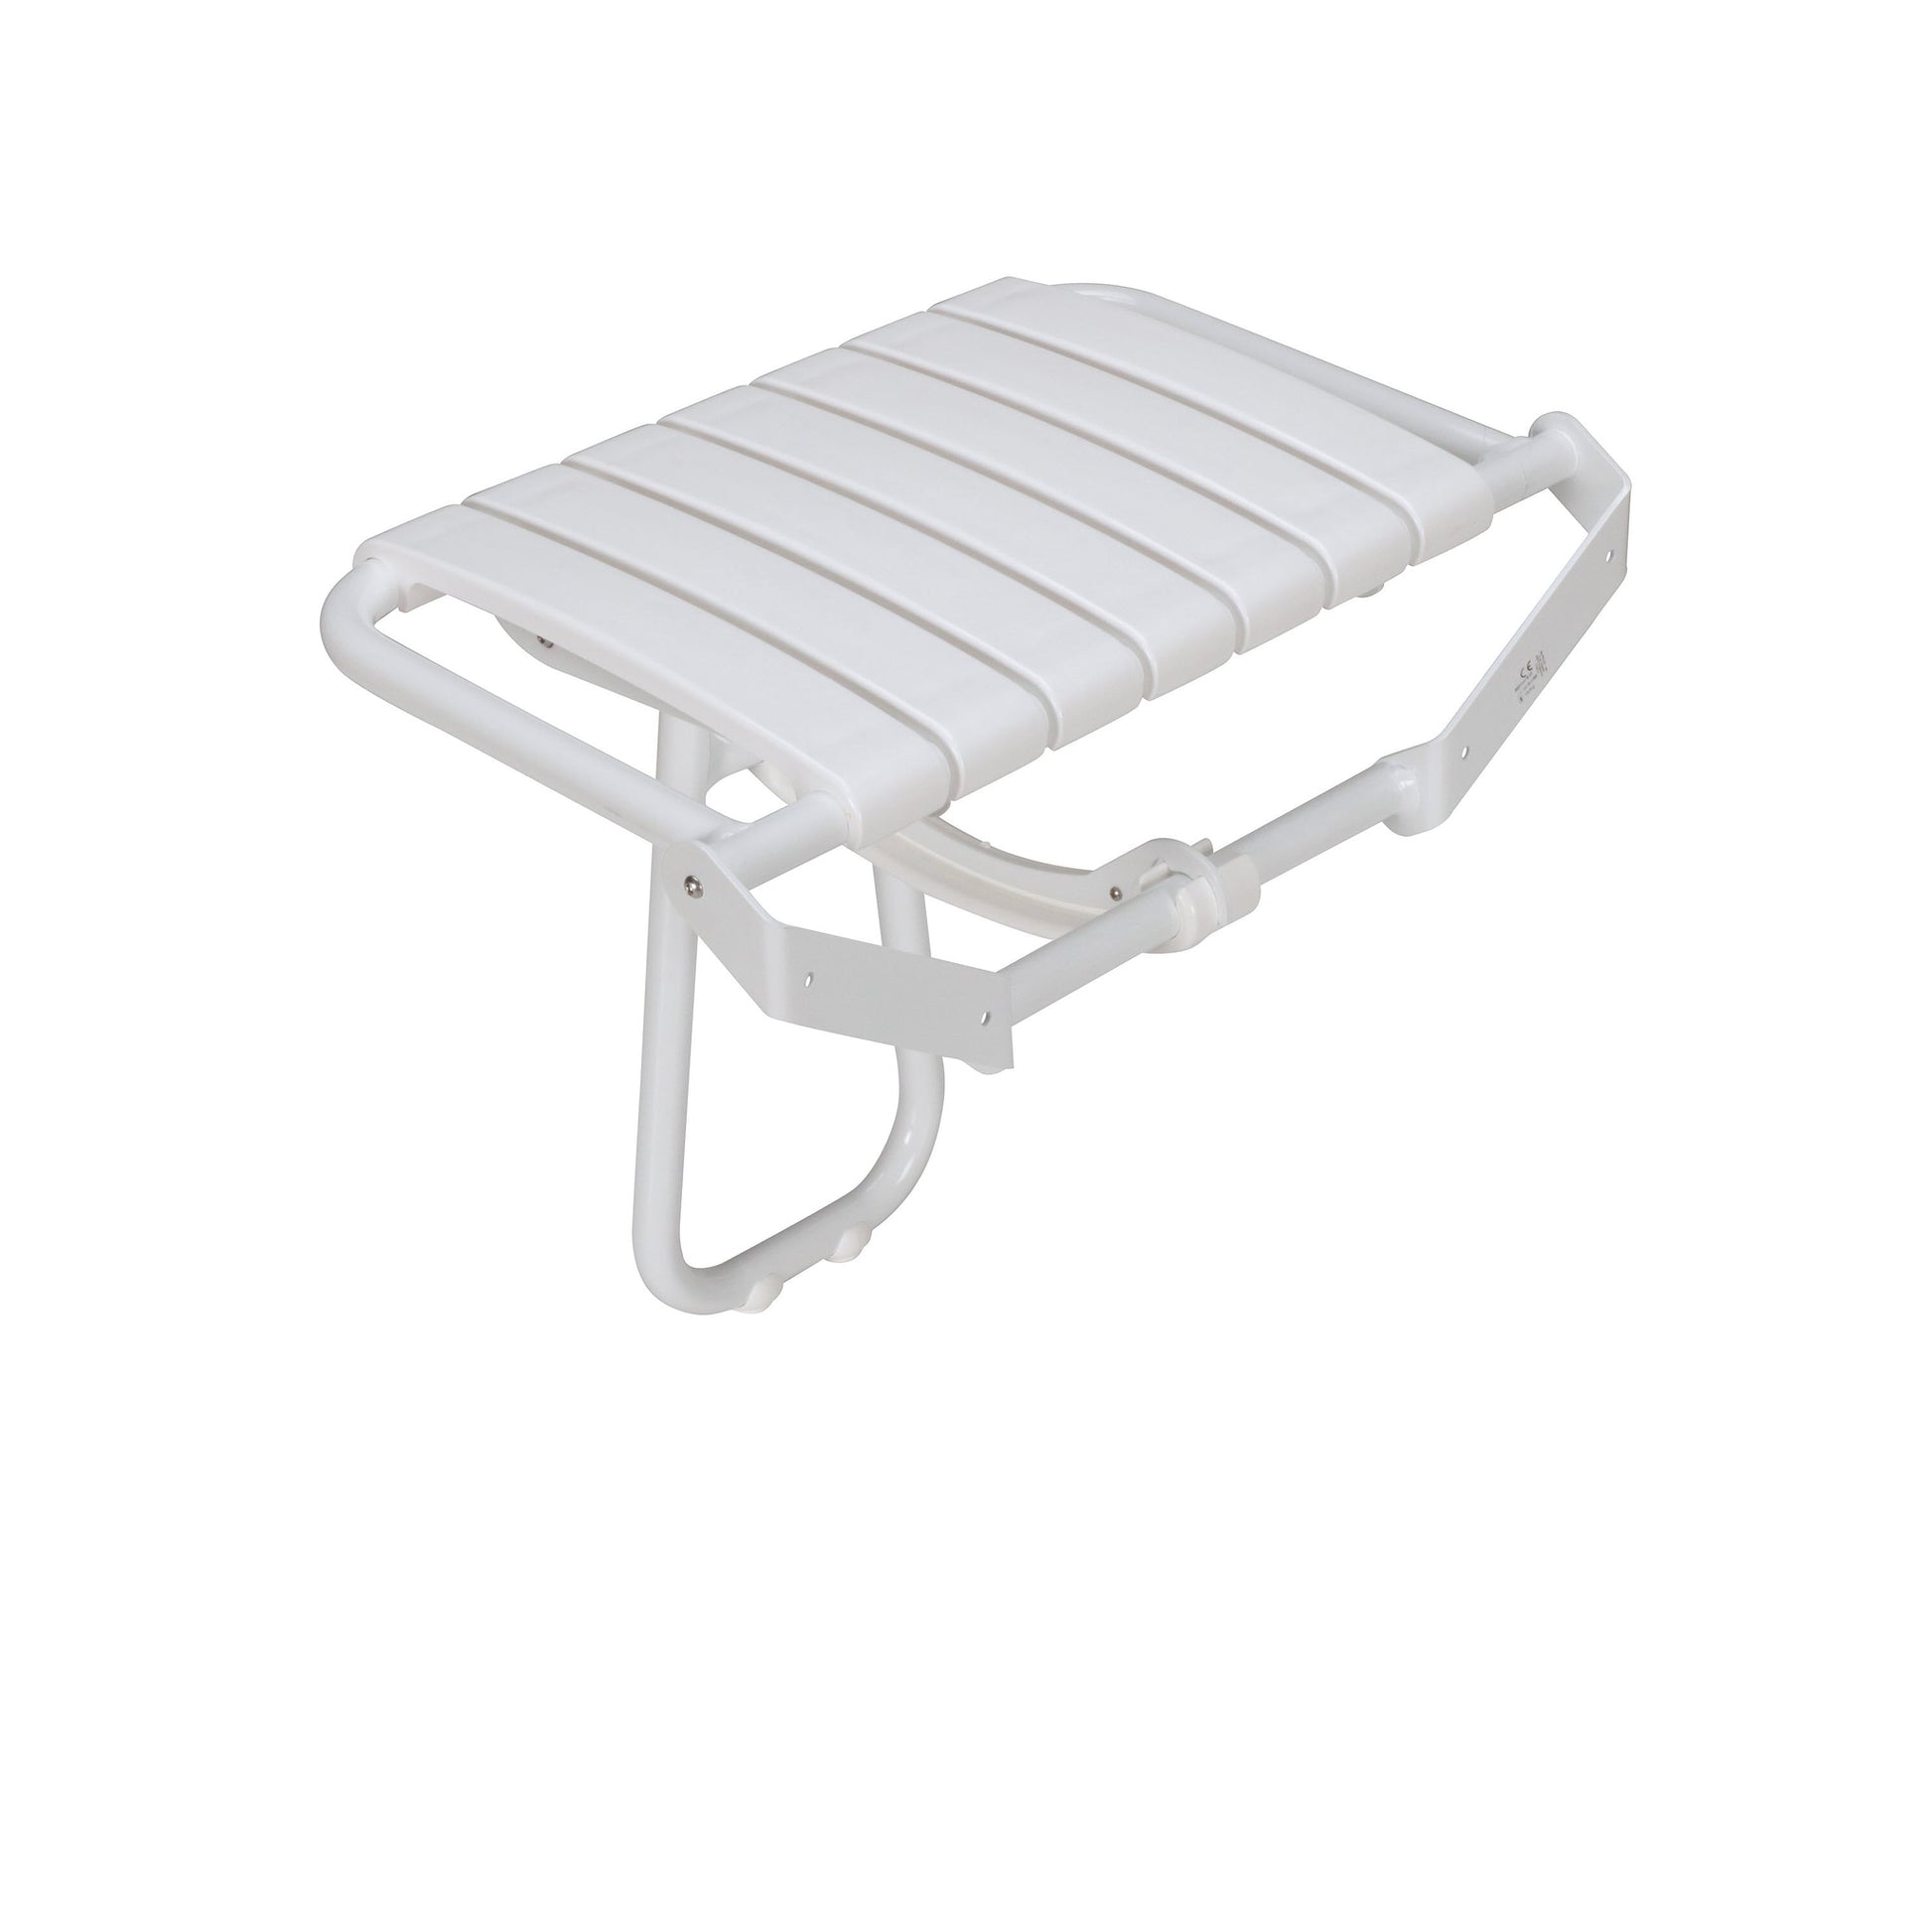 Design By Intent - Pellet Elegancia 23" Wall Mount Fold Away White Shower Seat With Integrated Support Stand